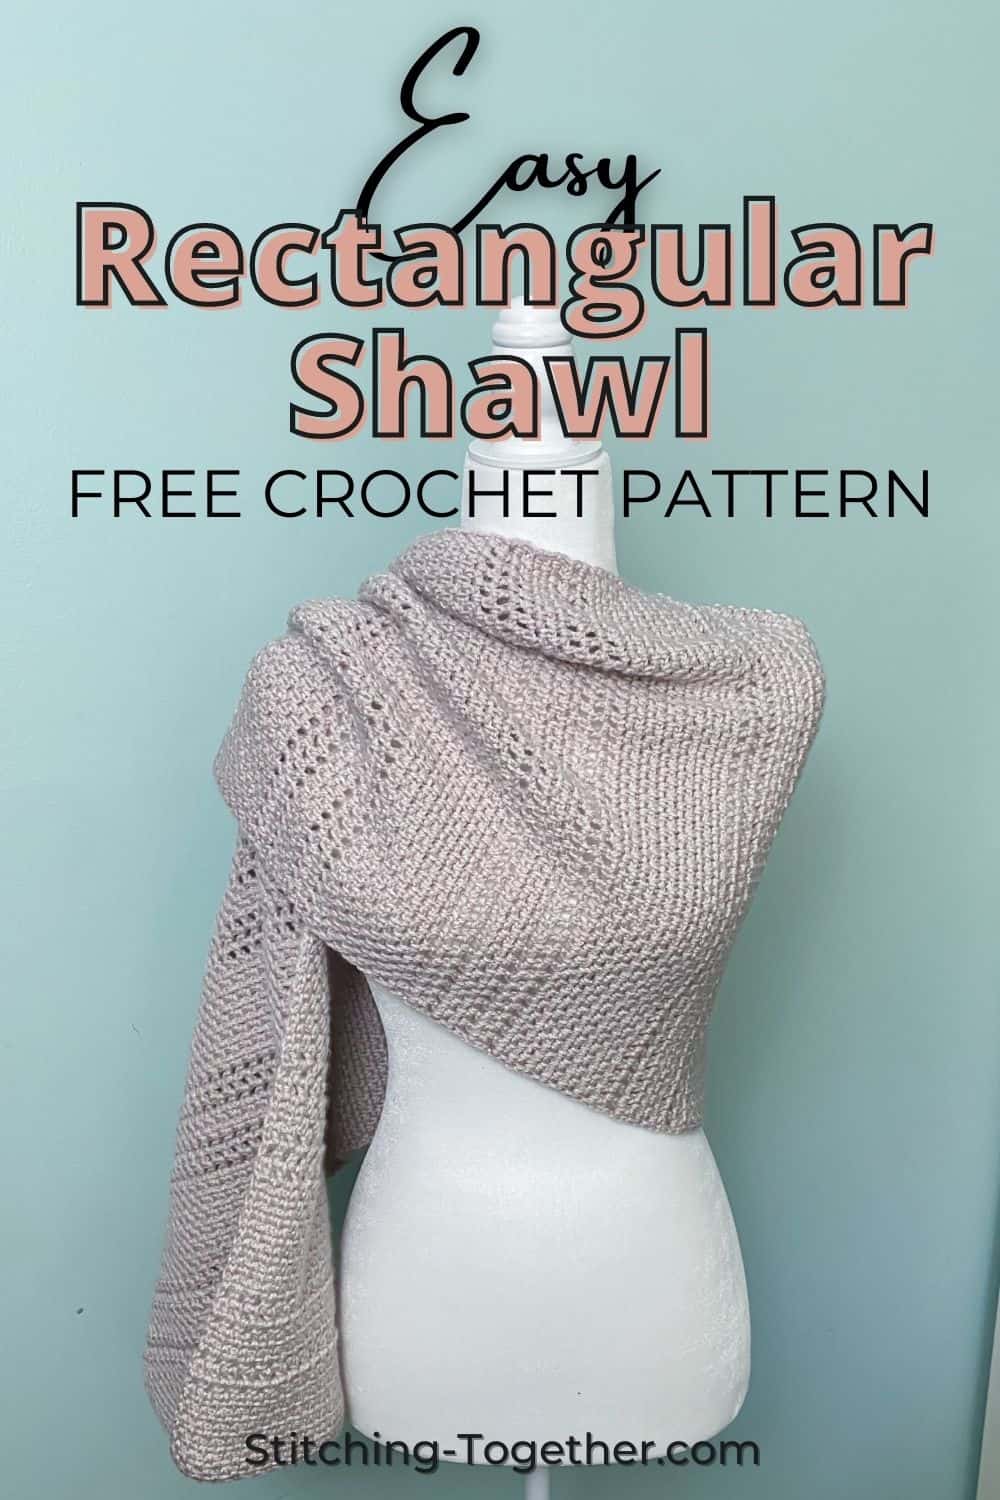 graphic with crochet shawl and text reading easy rectangular shawl free crochet pattern